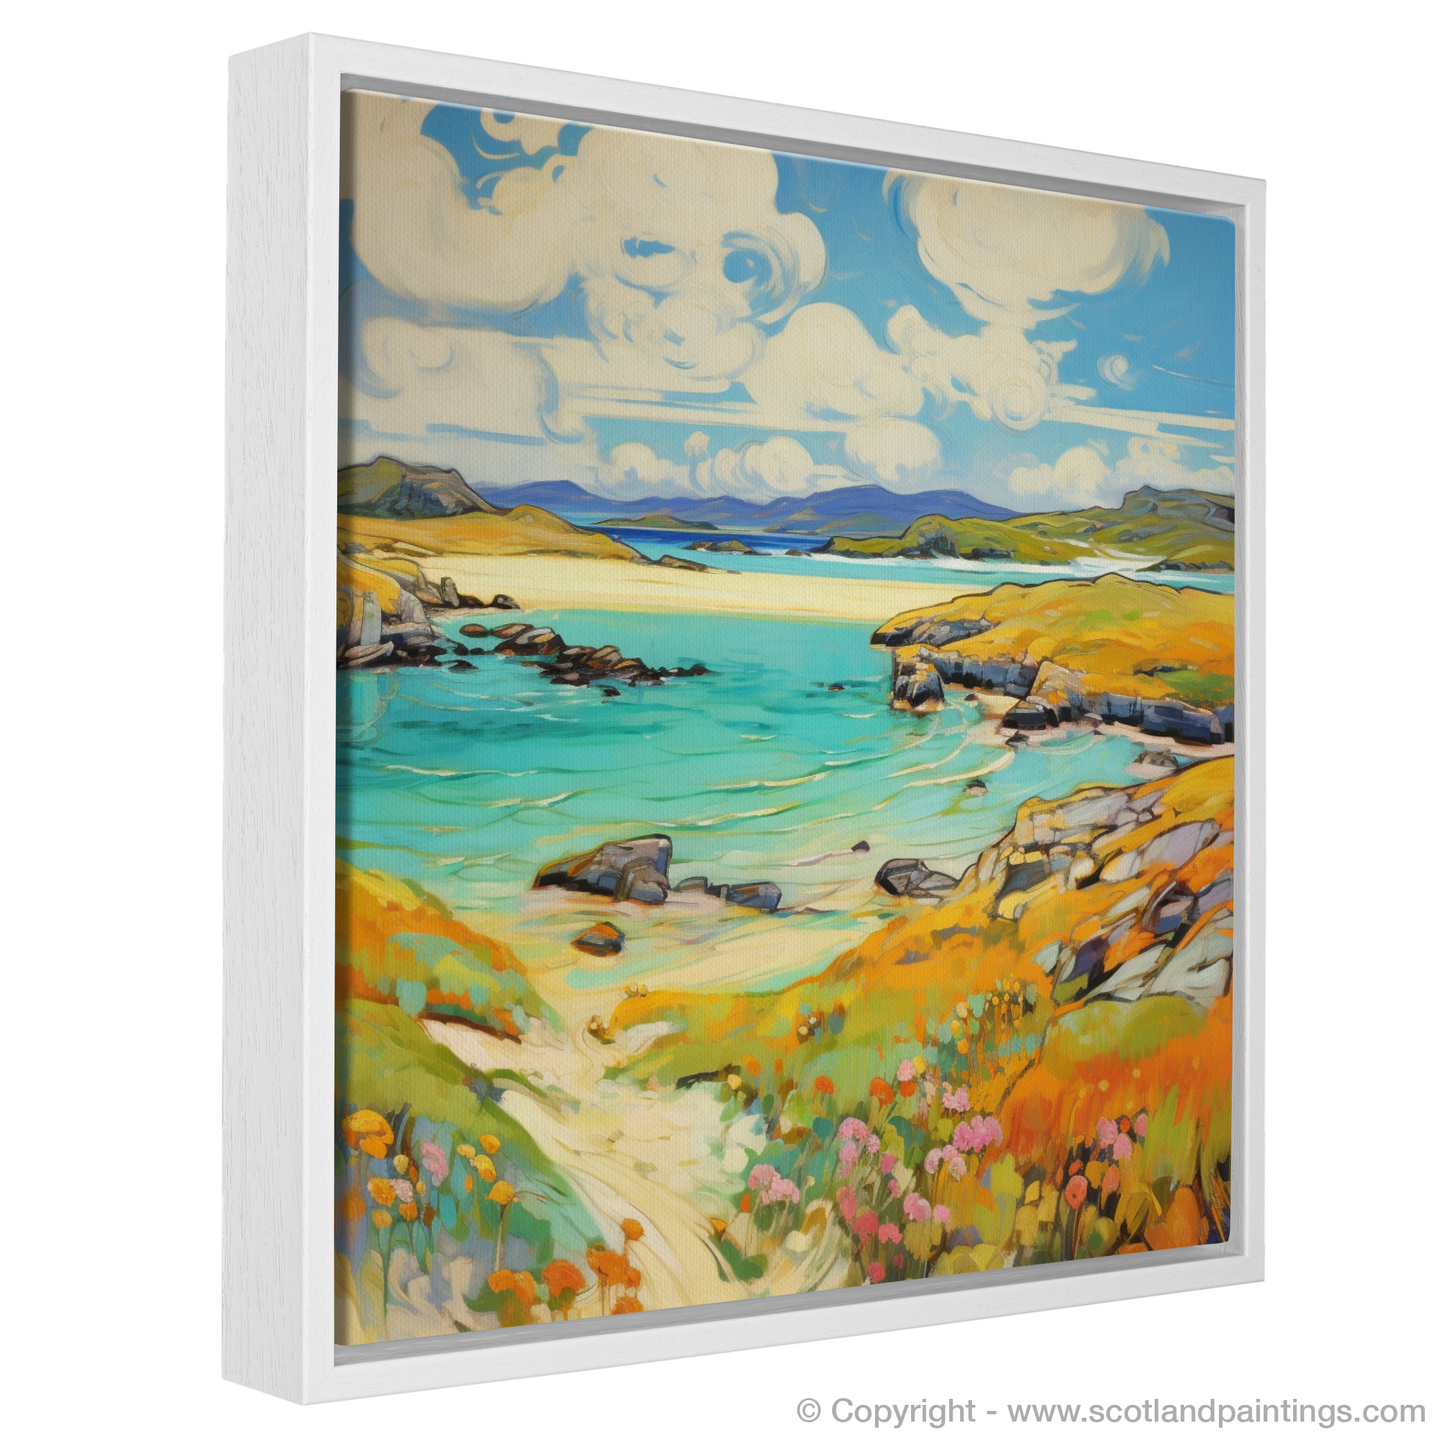 Painting and Art Print of Isle of Lewis, Outer Hebrides in summer entitled "Summer Serenade in Isle of Lewis Fauvist Bliss".